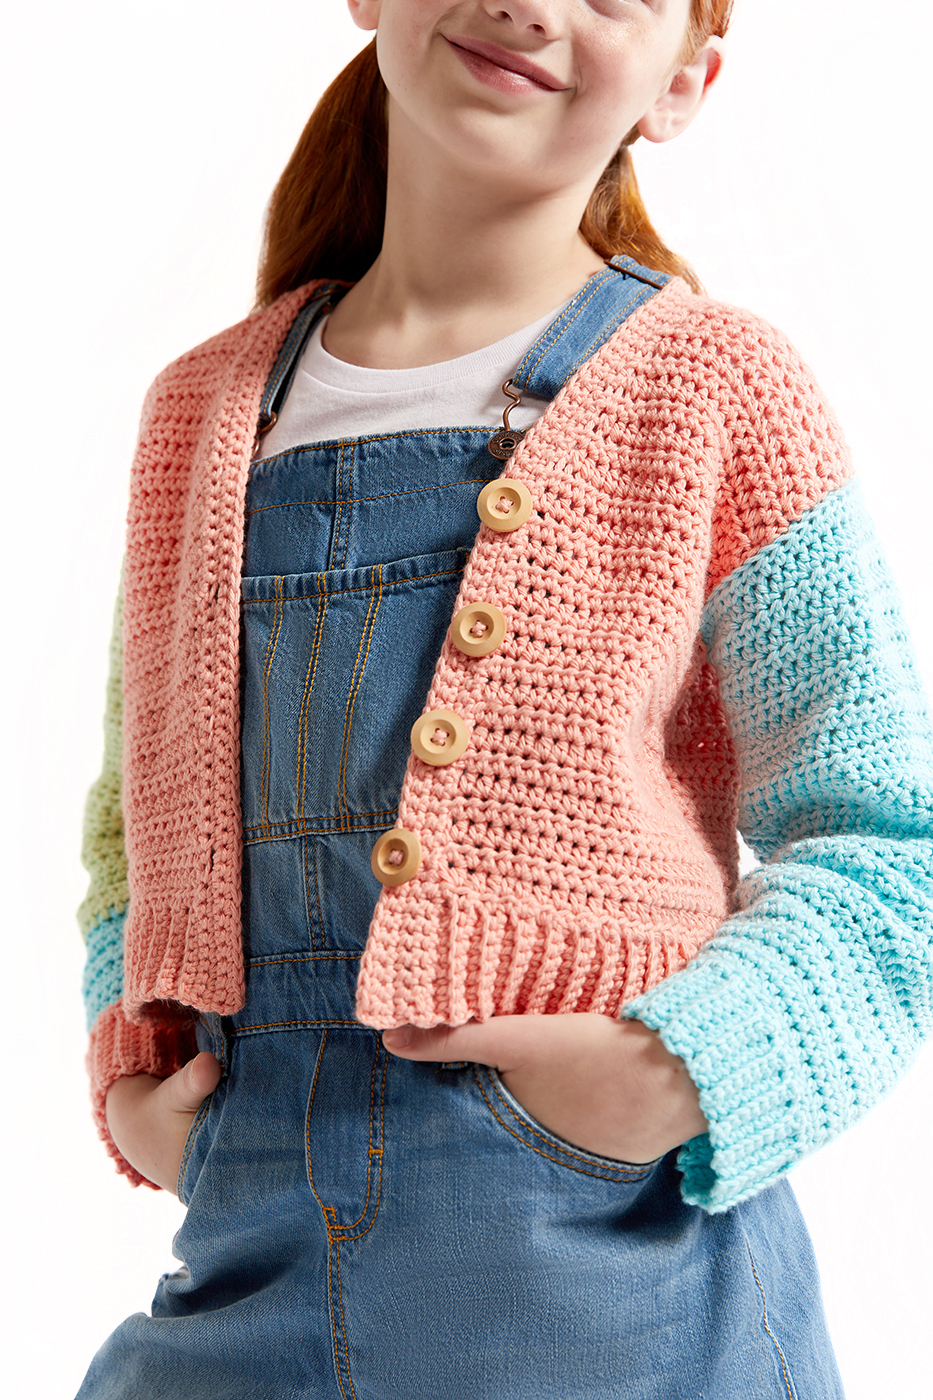 e-commerce fashion photography of young girl with red hair wearing a crocheted color blocked sweater.